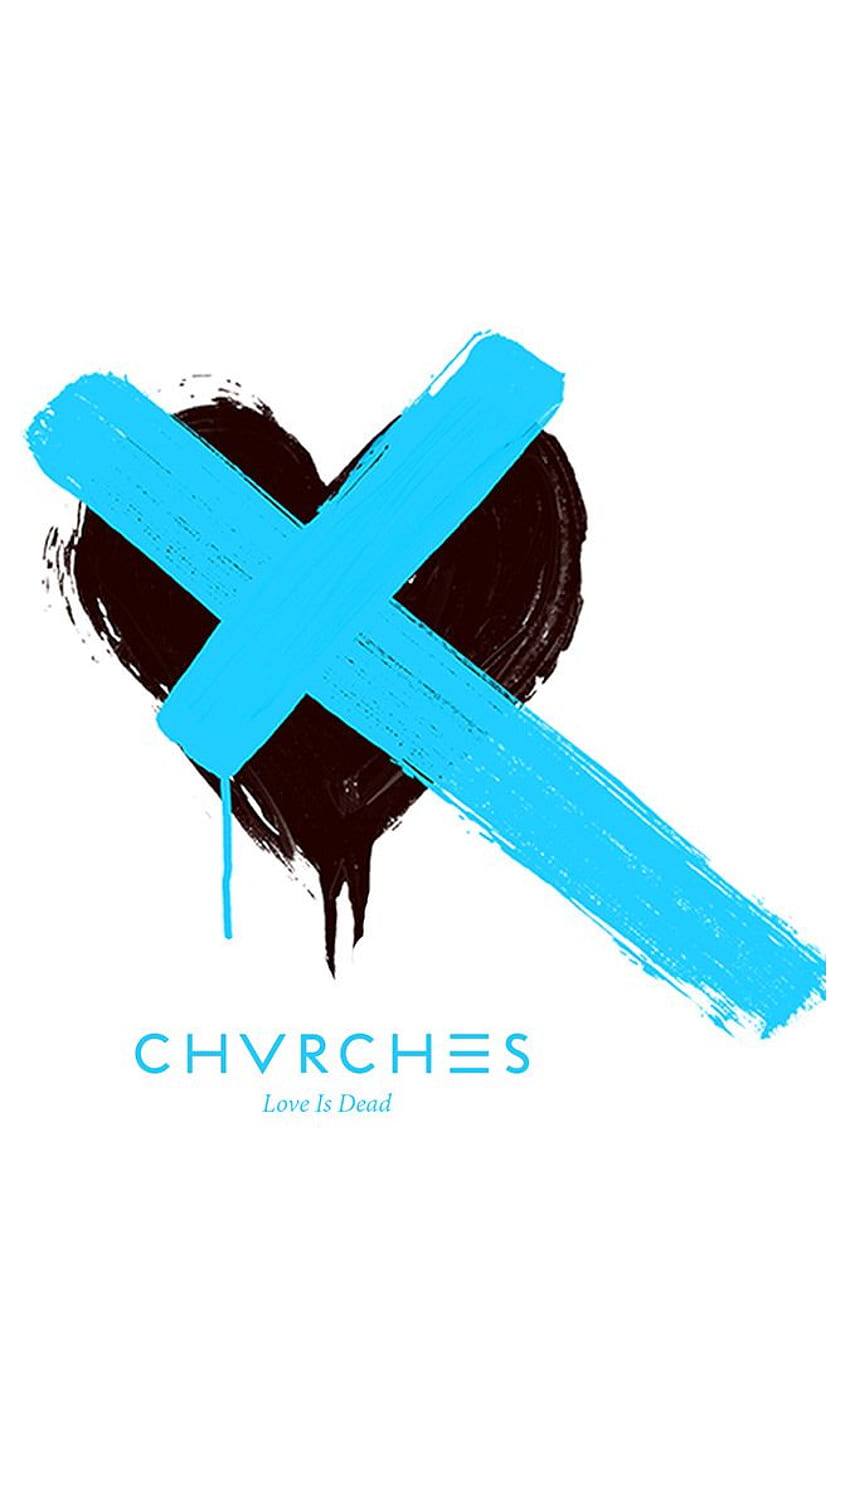 Made the Love Is Dead cover in the style of their older album covers. : chvrches HD phone wallpaper